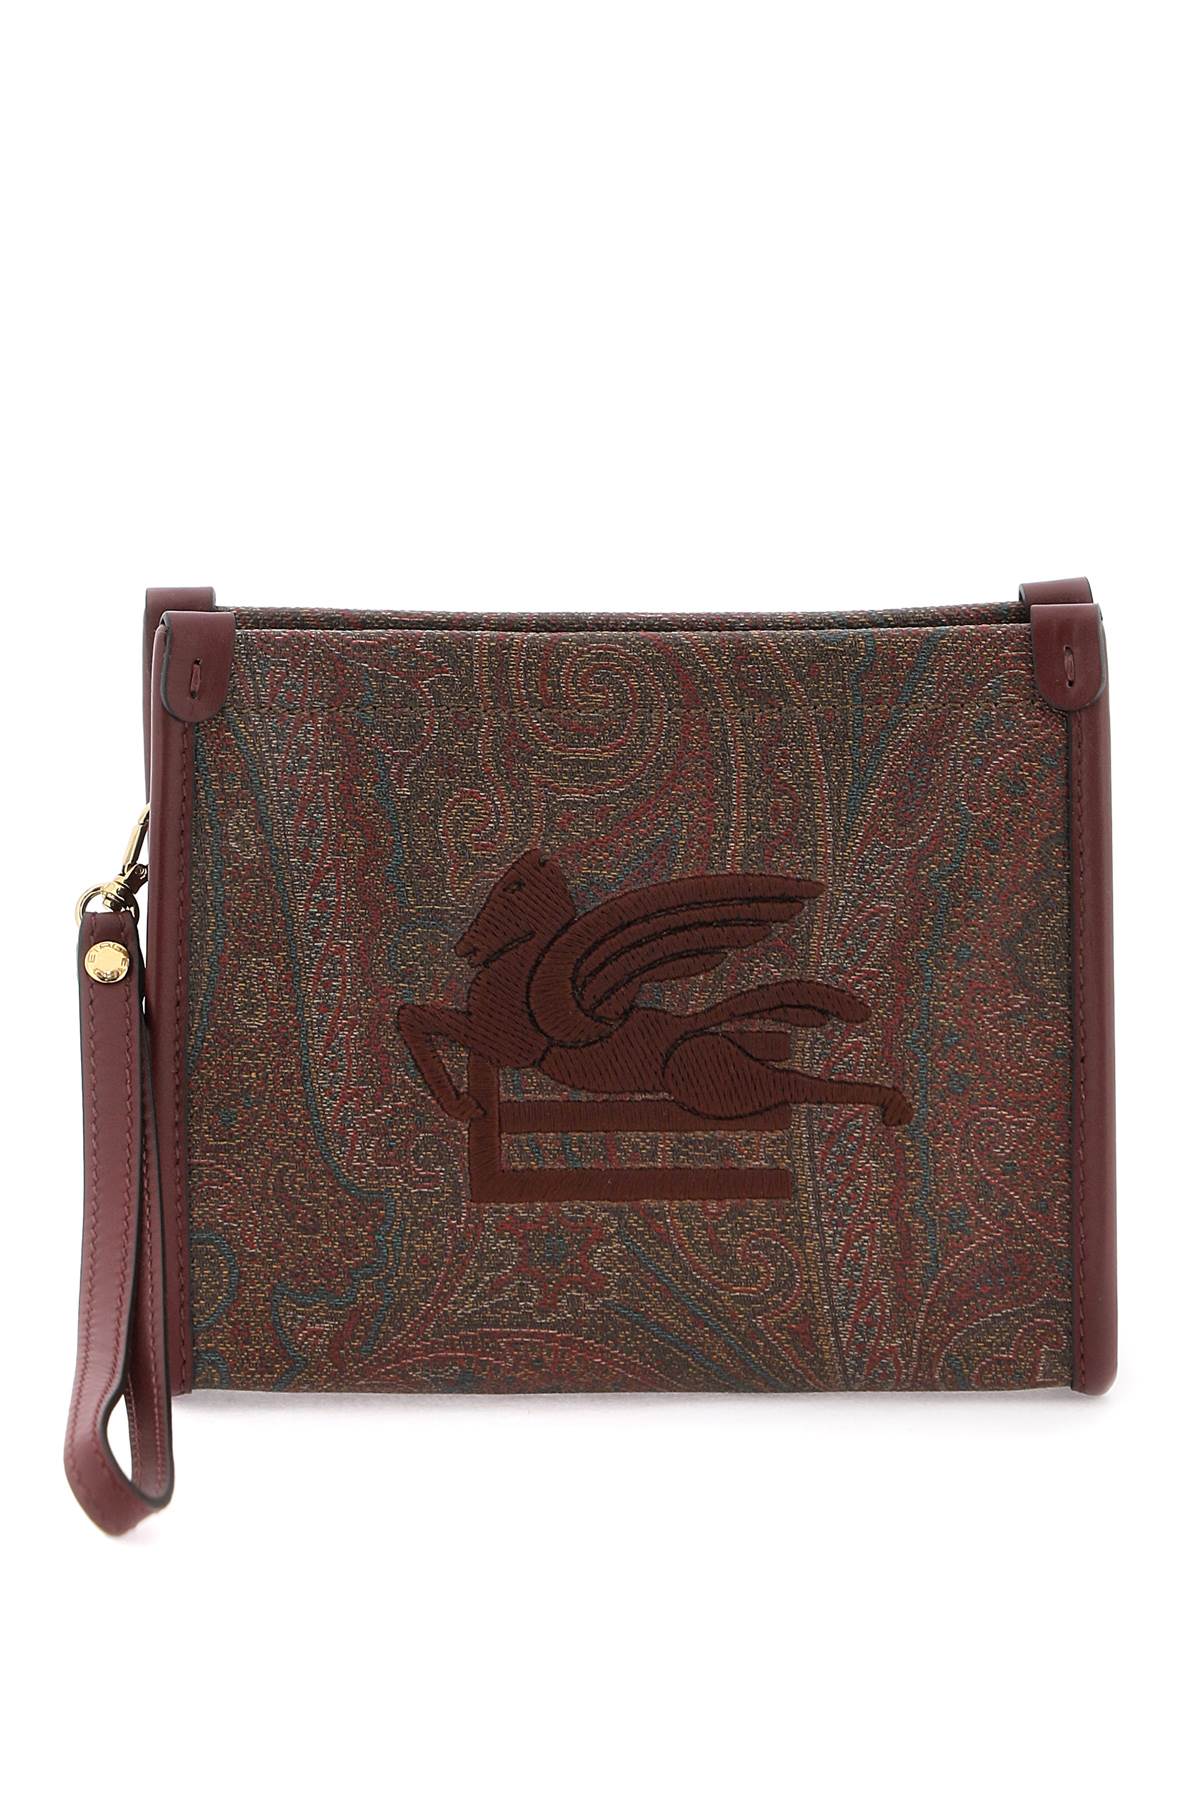 Logo Paisley All-over Print Clutch